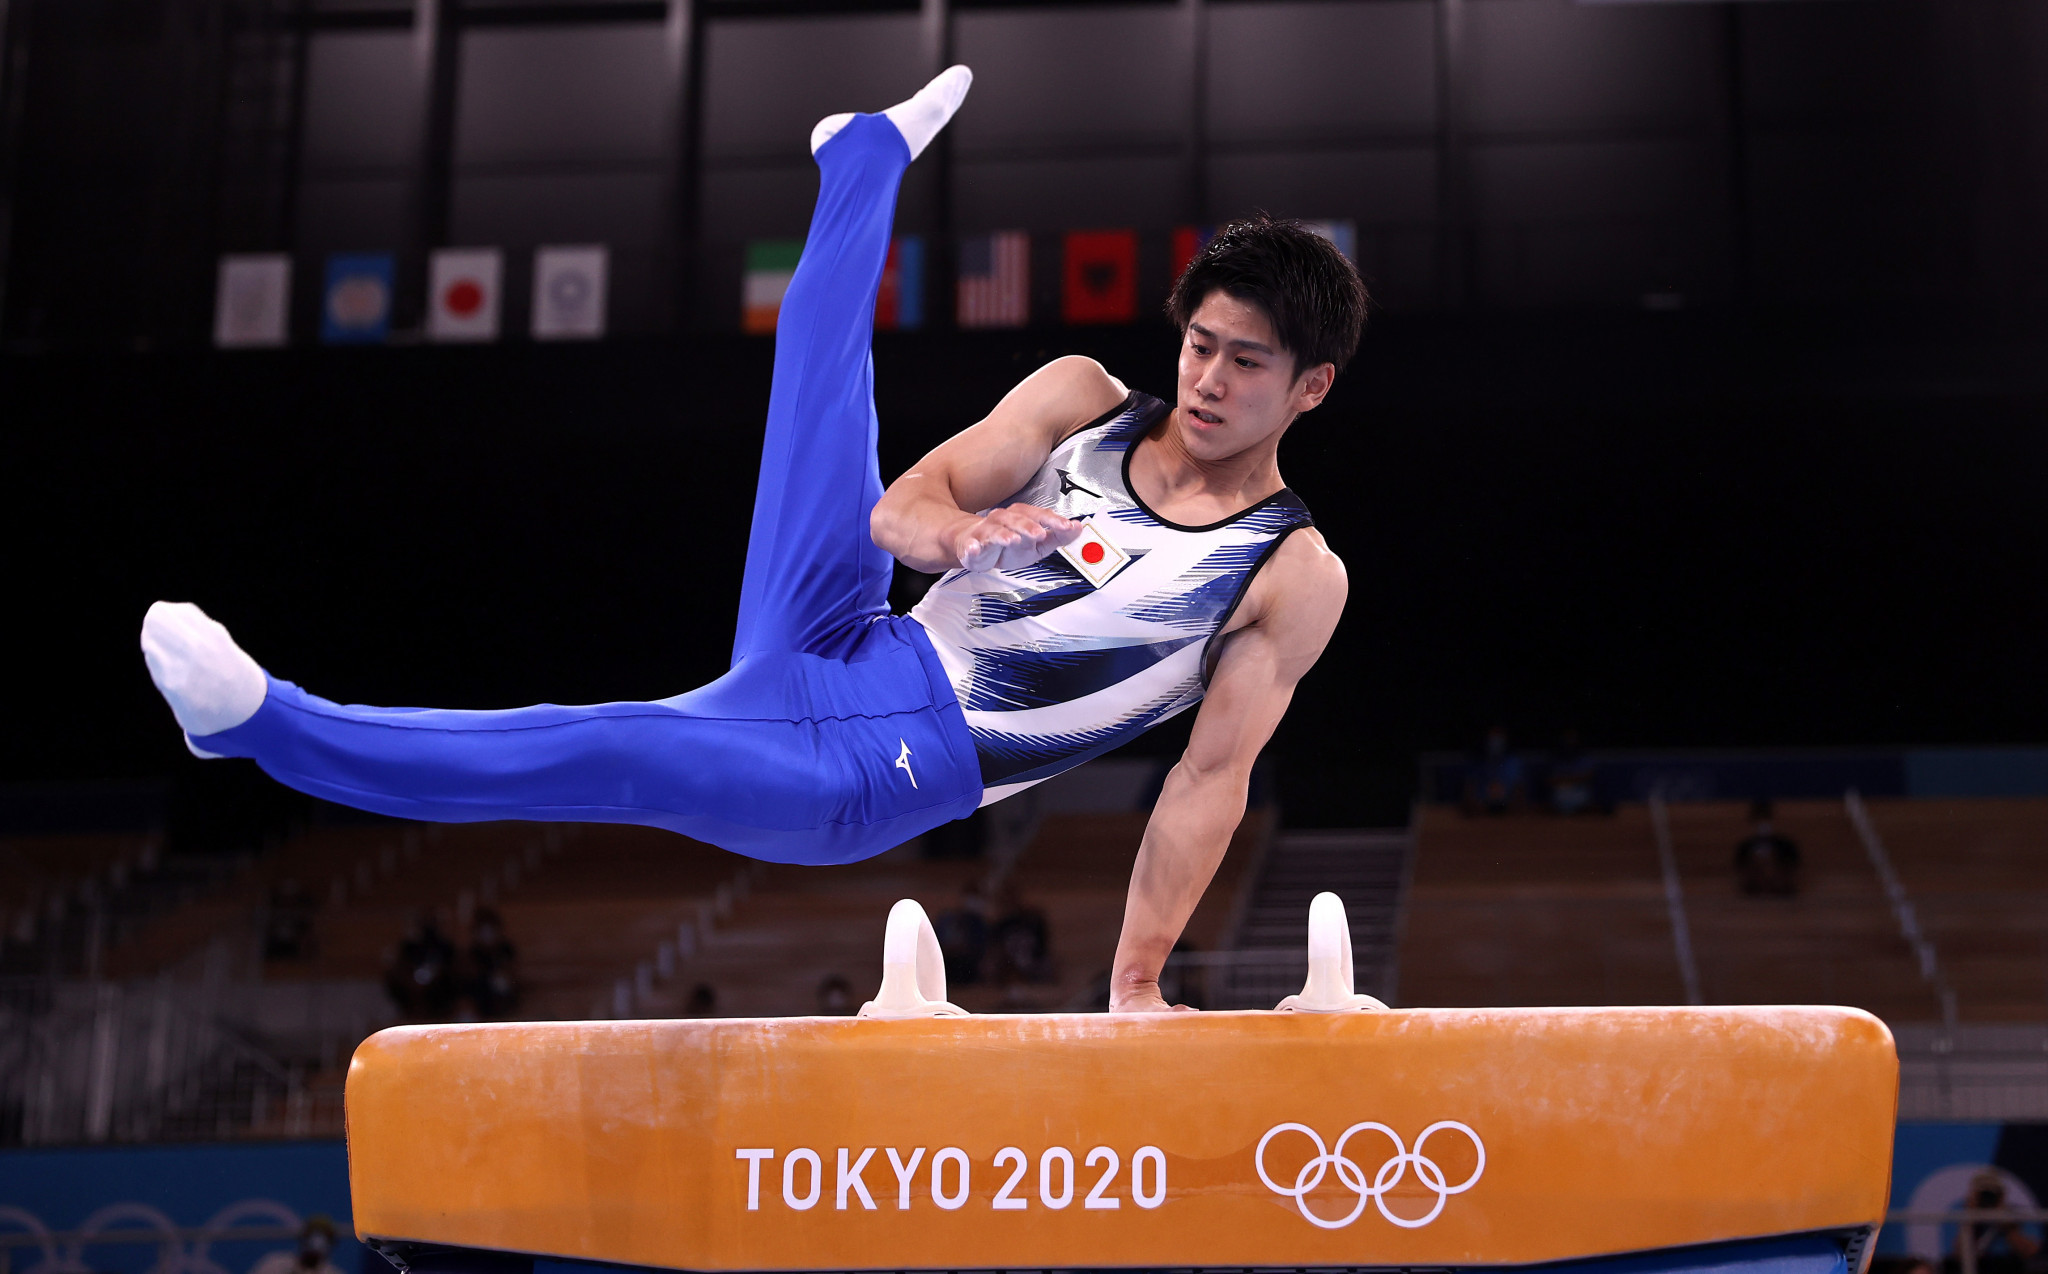 Teenager Daiki Hashimoto provided Japan with another stunning moment on the fifth day of full competition at the Tokyo 2020 Olympics, winning the men's all-around gold medal in artistic gymnastics  ©Getty Images